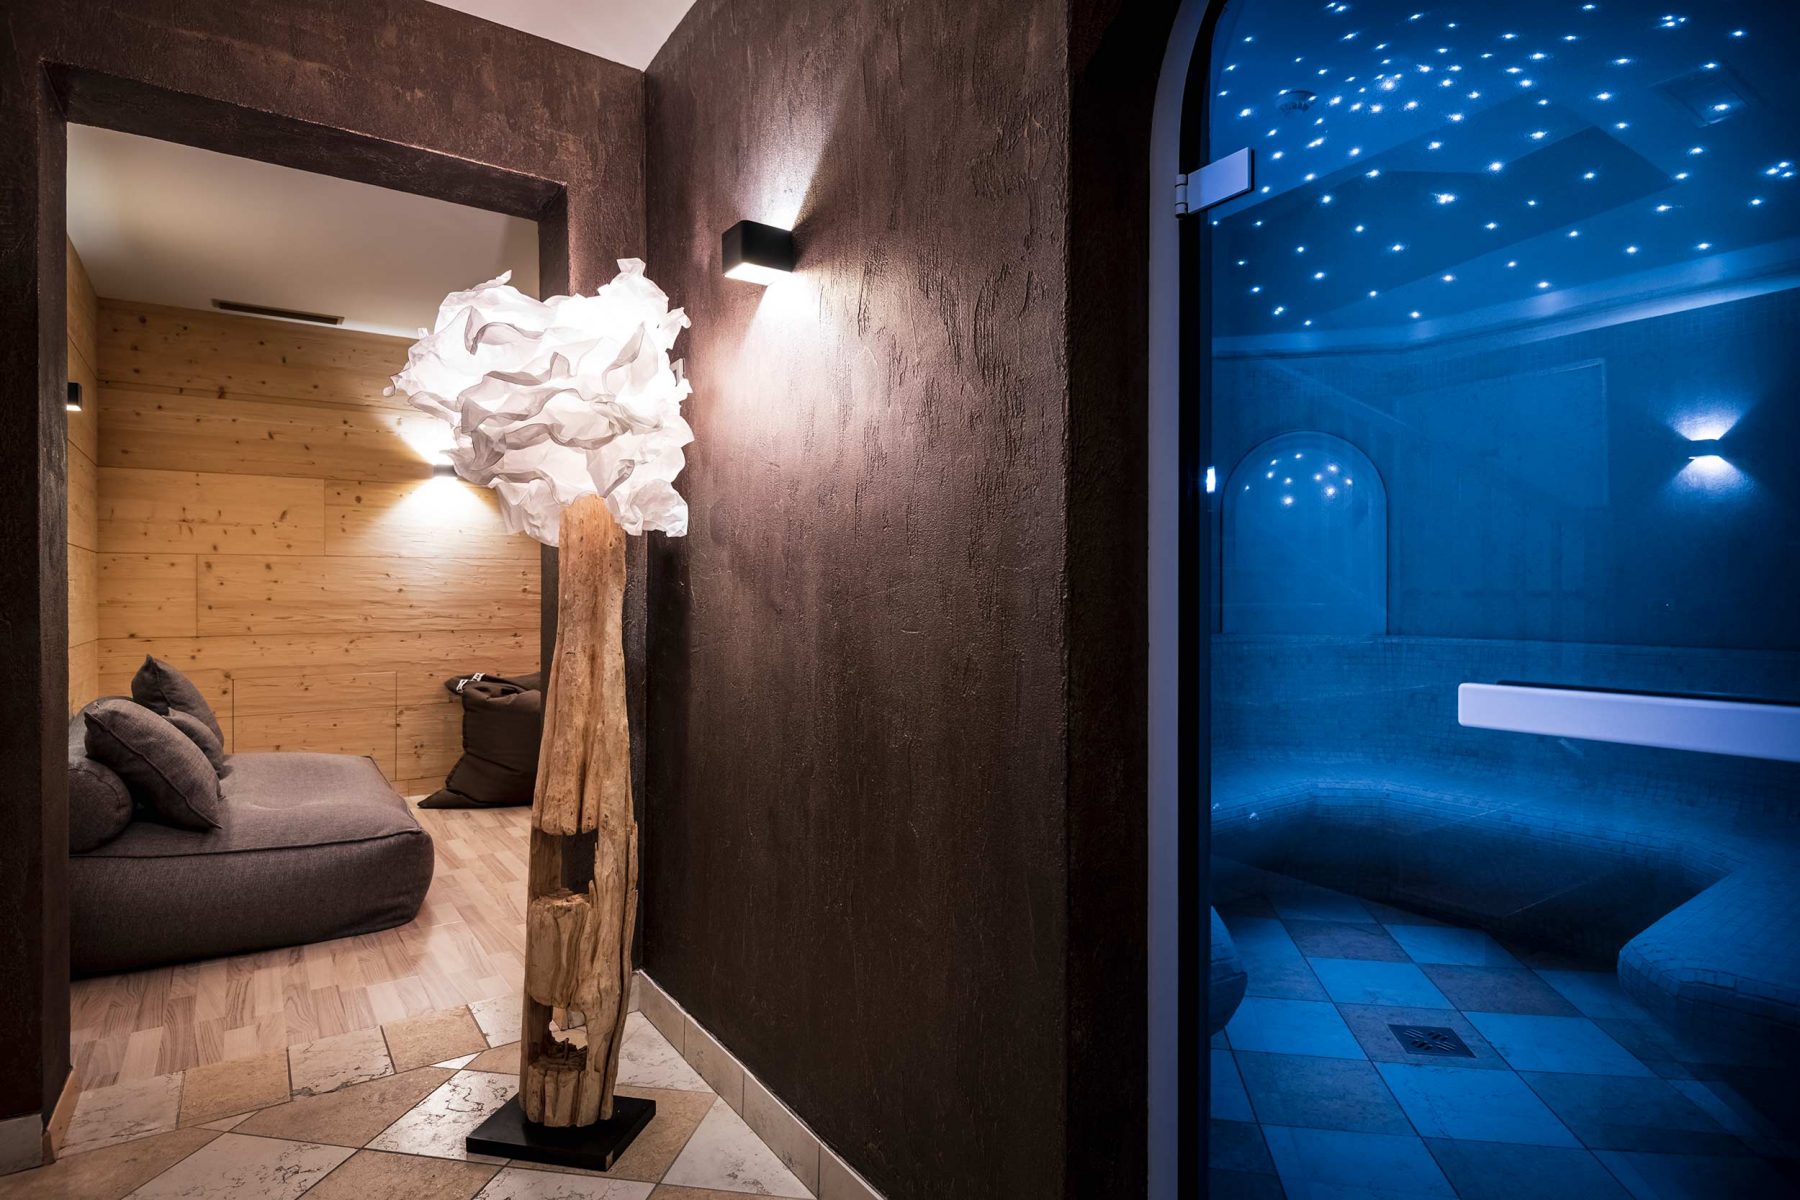 The wellness at the hotel Antines in La Villa. Book your stay at the Hotel Antines here. Planning your summer in the mountains of Alta Badia.